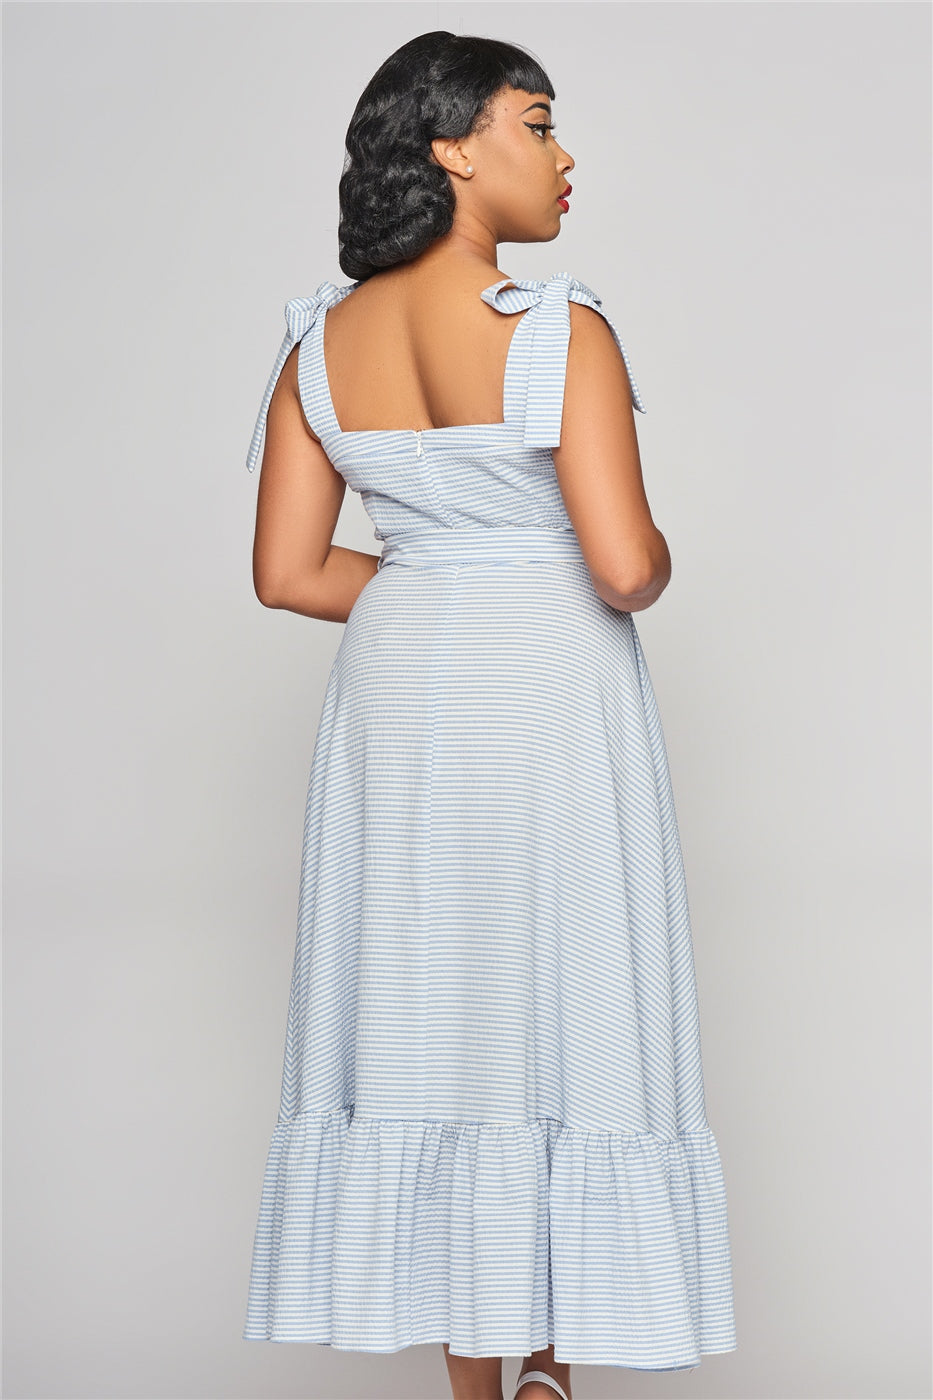 The back of the Seersucker Katrina Dress by Collectif. The shoulder sleeves are tied and there is a concealed zip in the back centre.